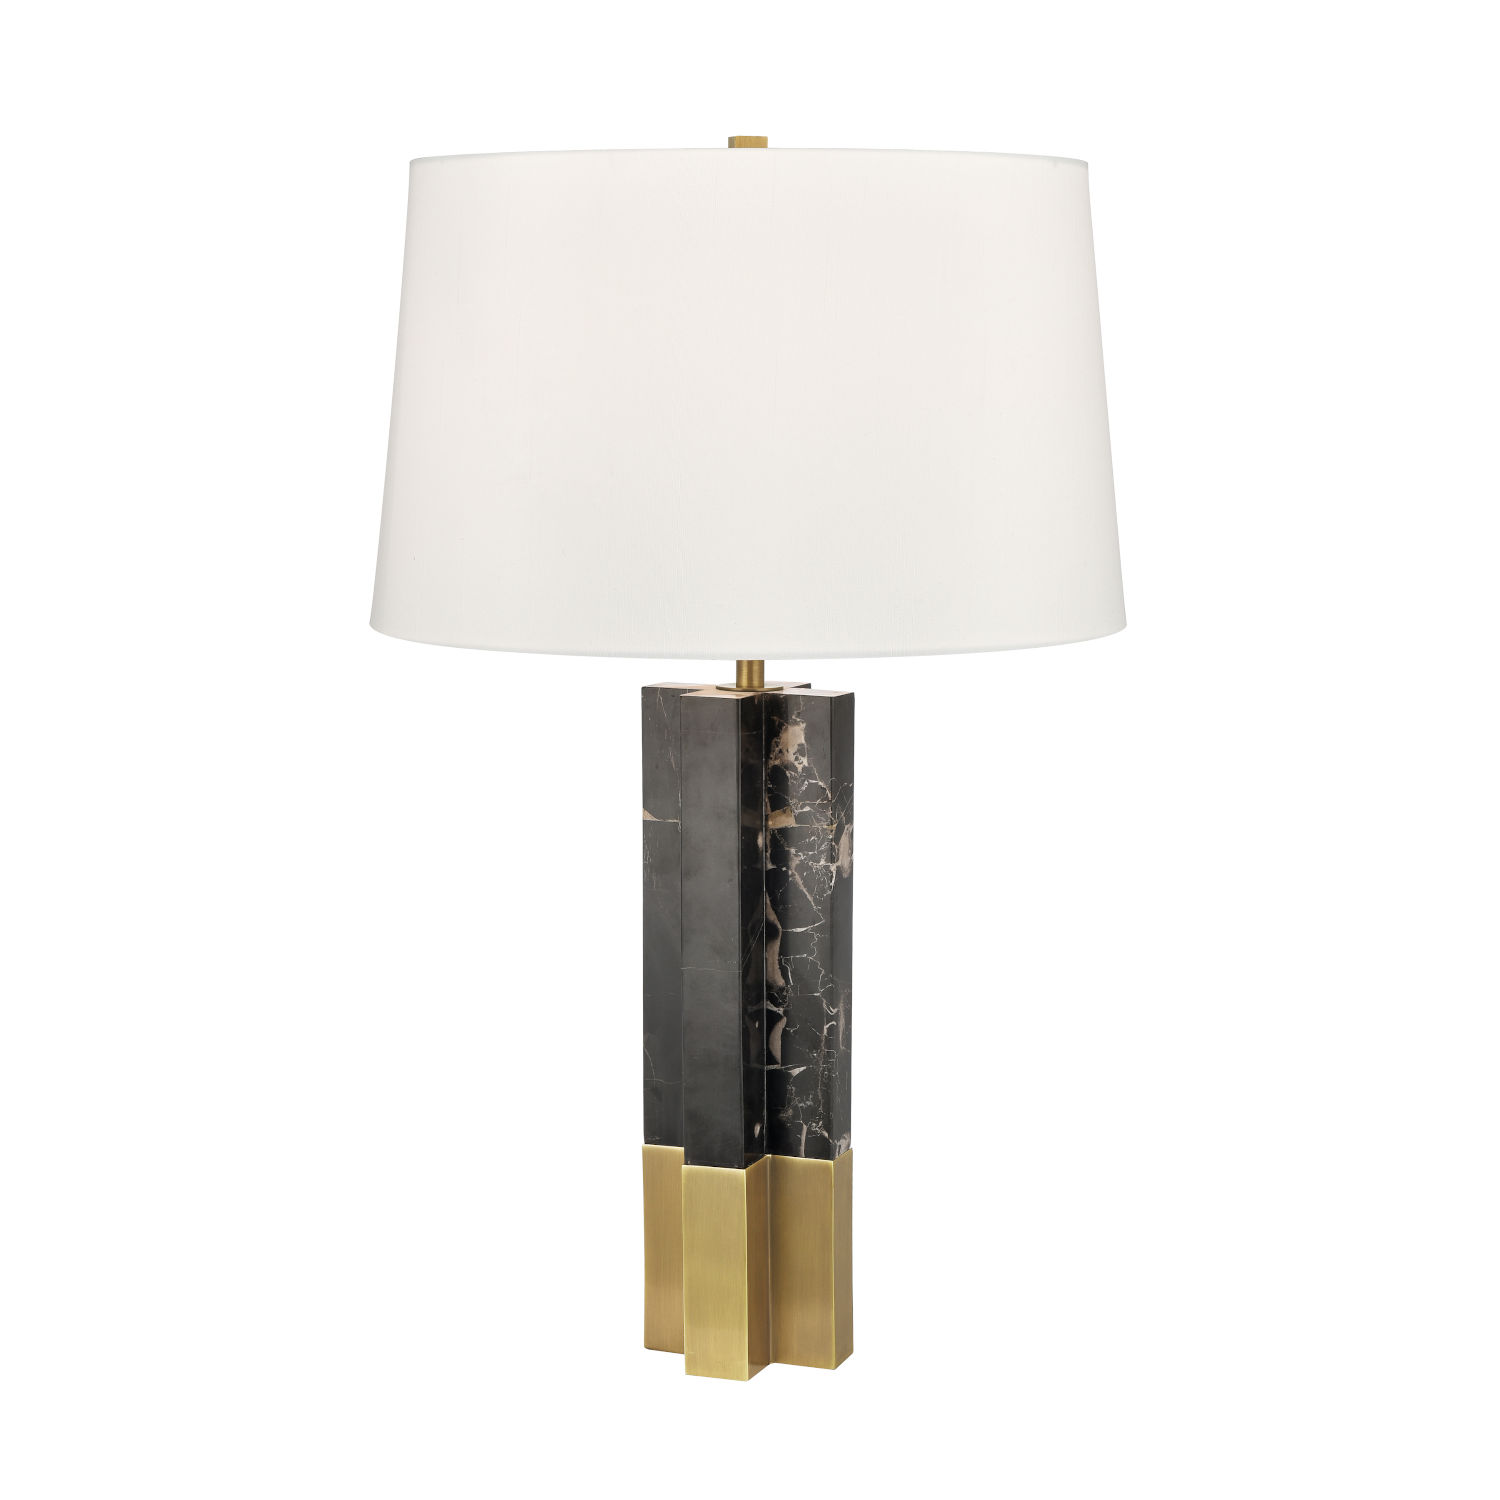 Upright Black And Brass One-Light Table Lamp